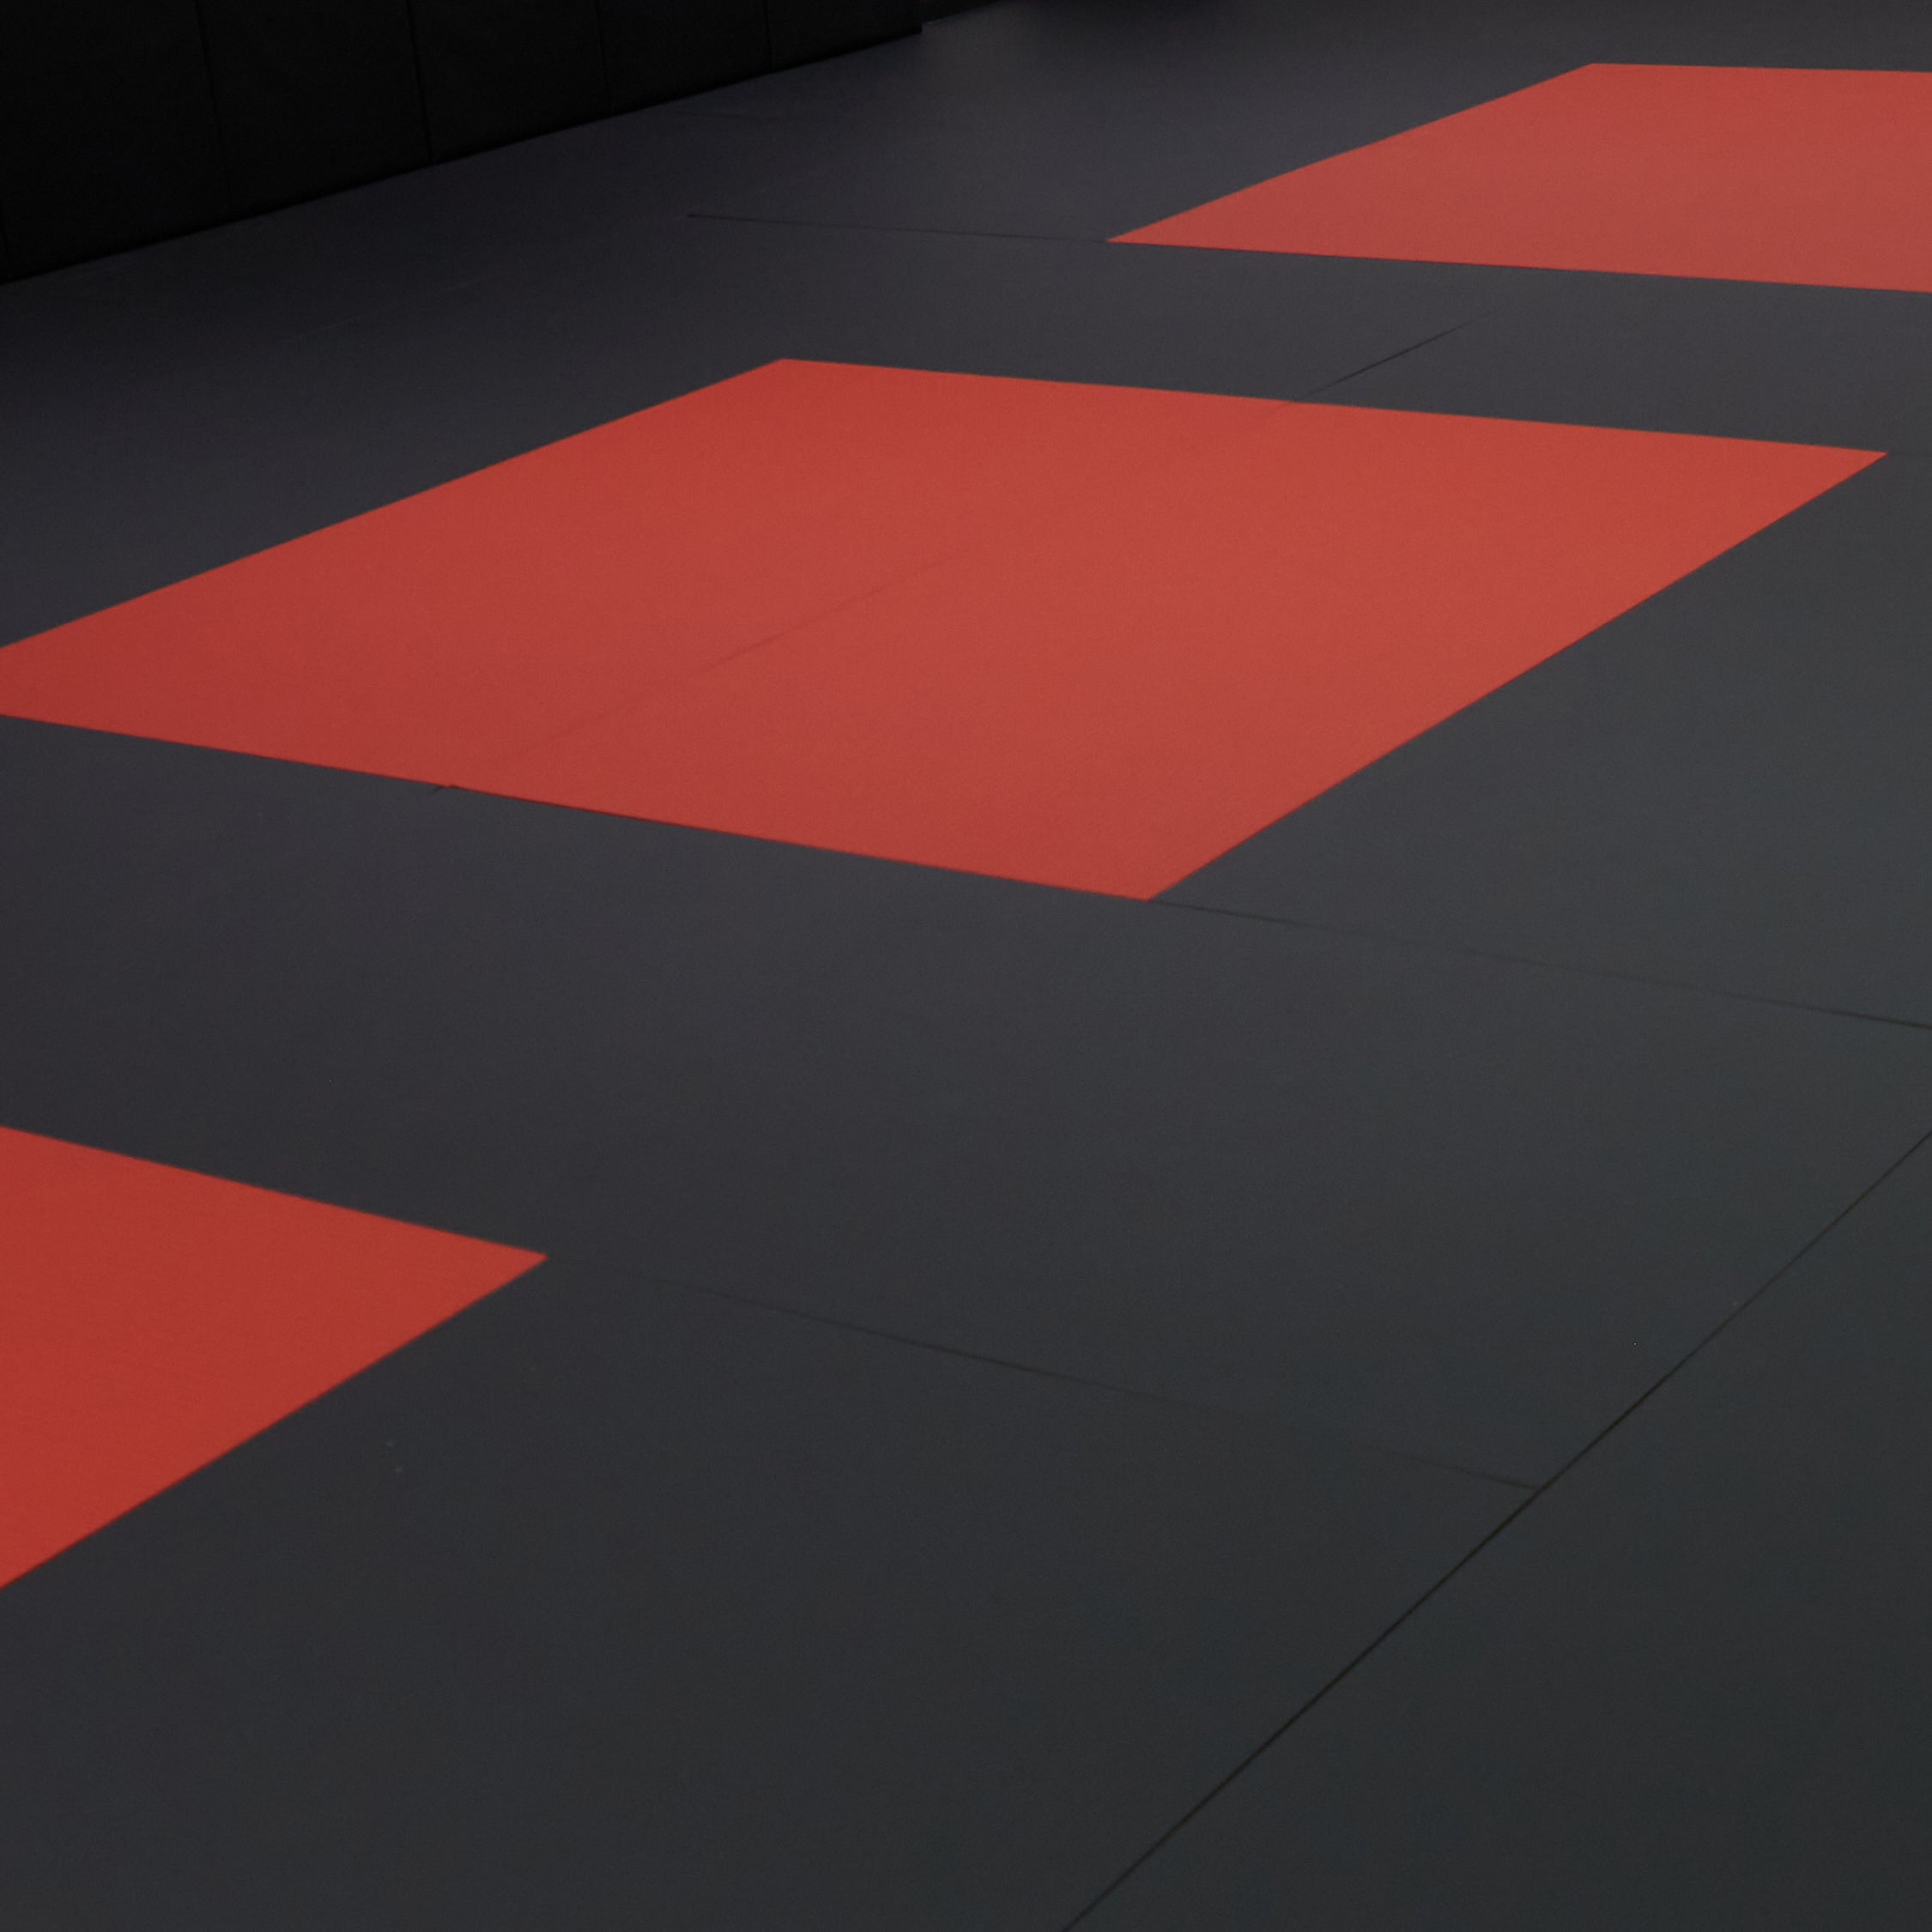 tile mats for professional gym or martial arts flooring